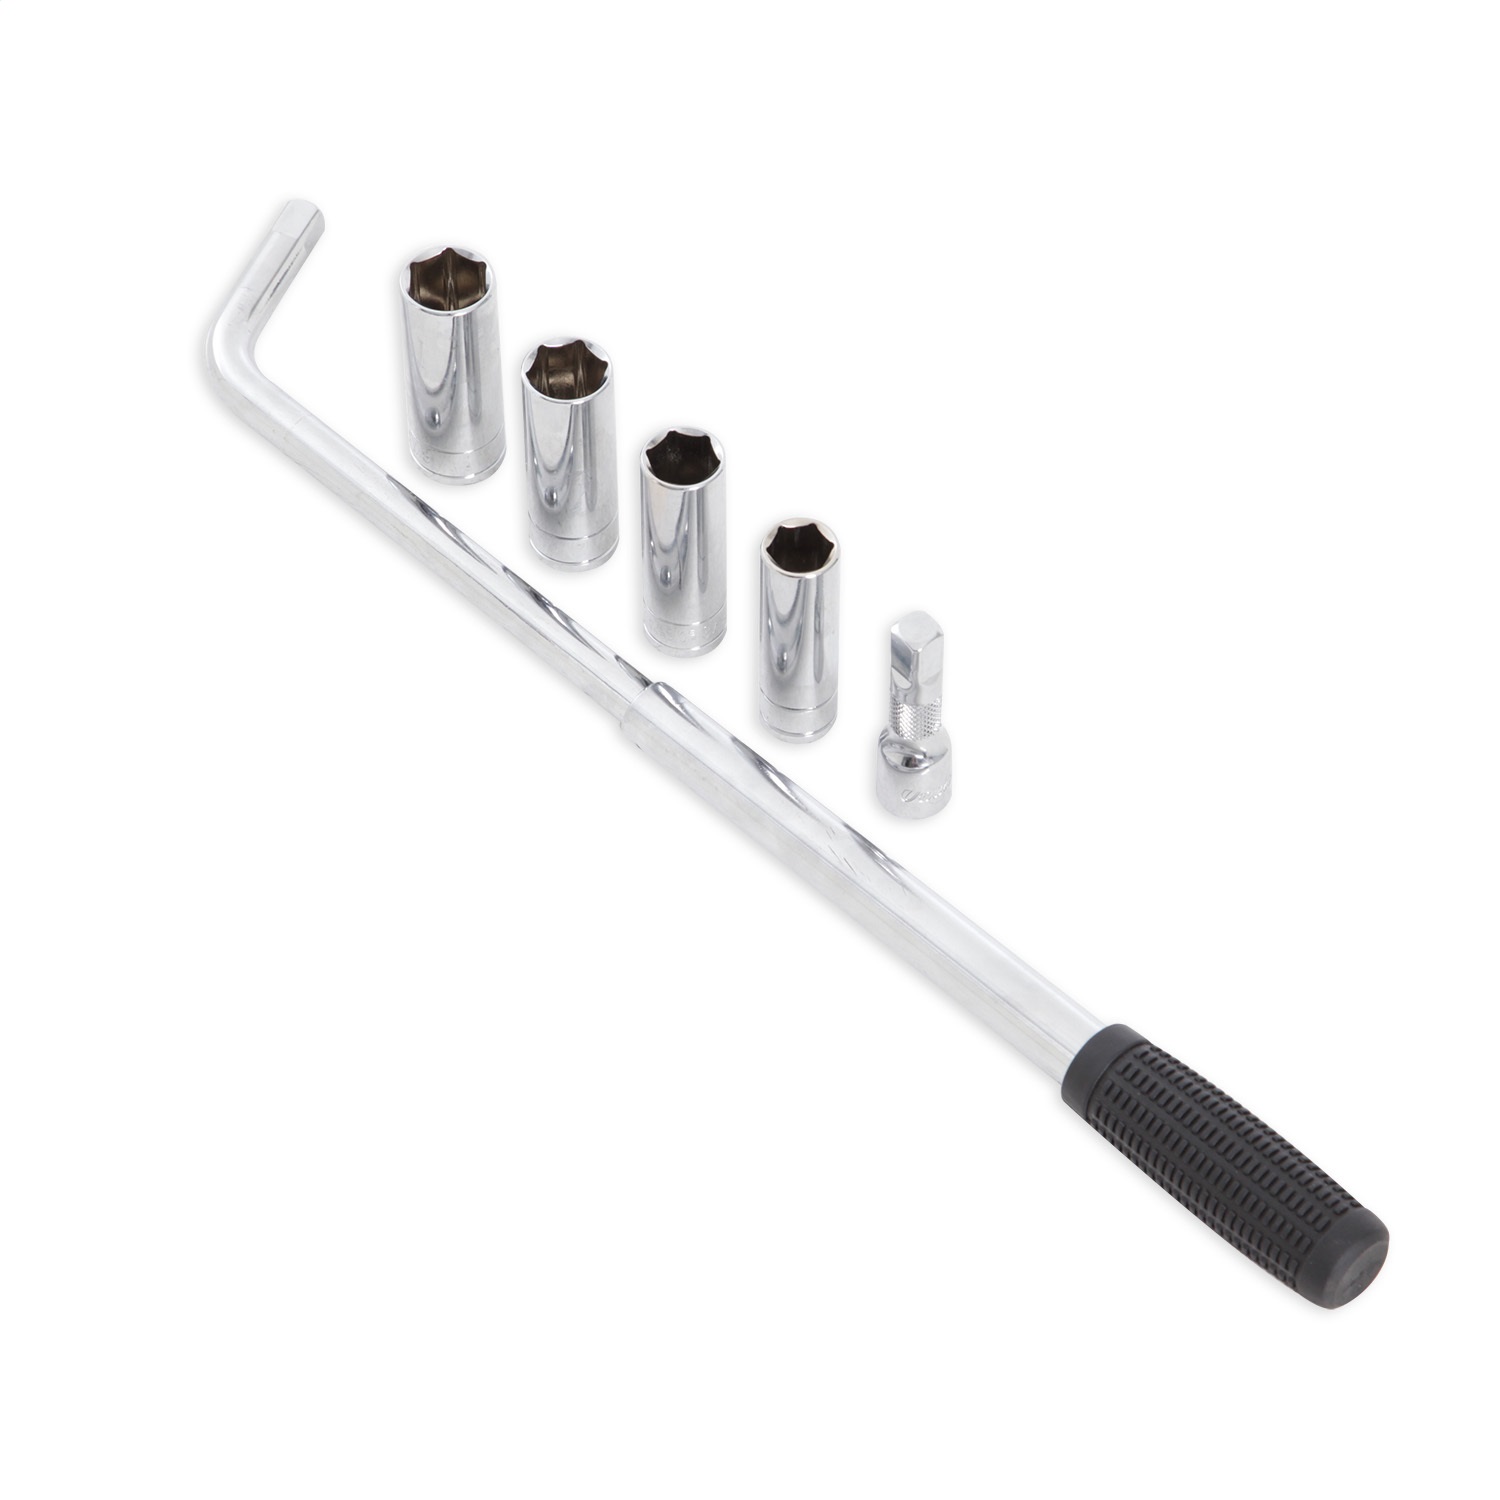 Pro Comp Alloy Pro Comp Alloy LWRENCH Telescoping Lug Wrench